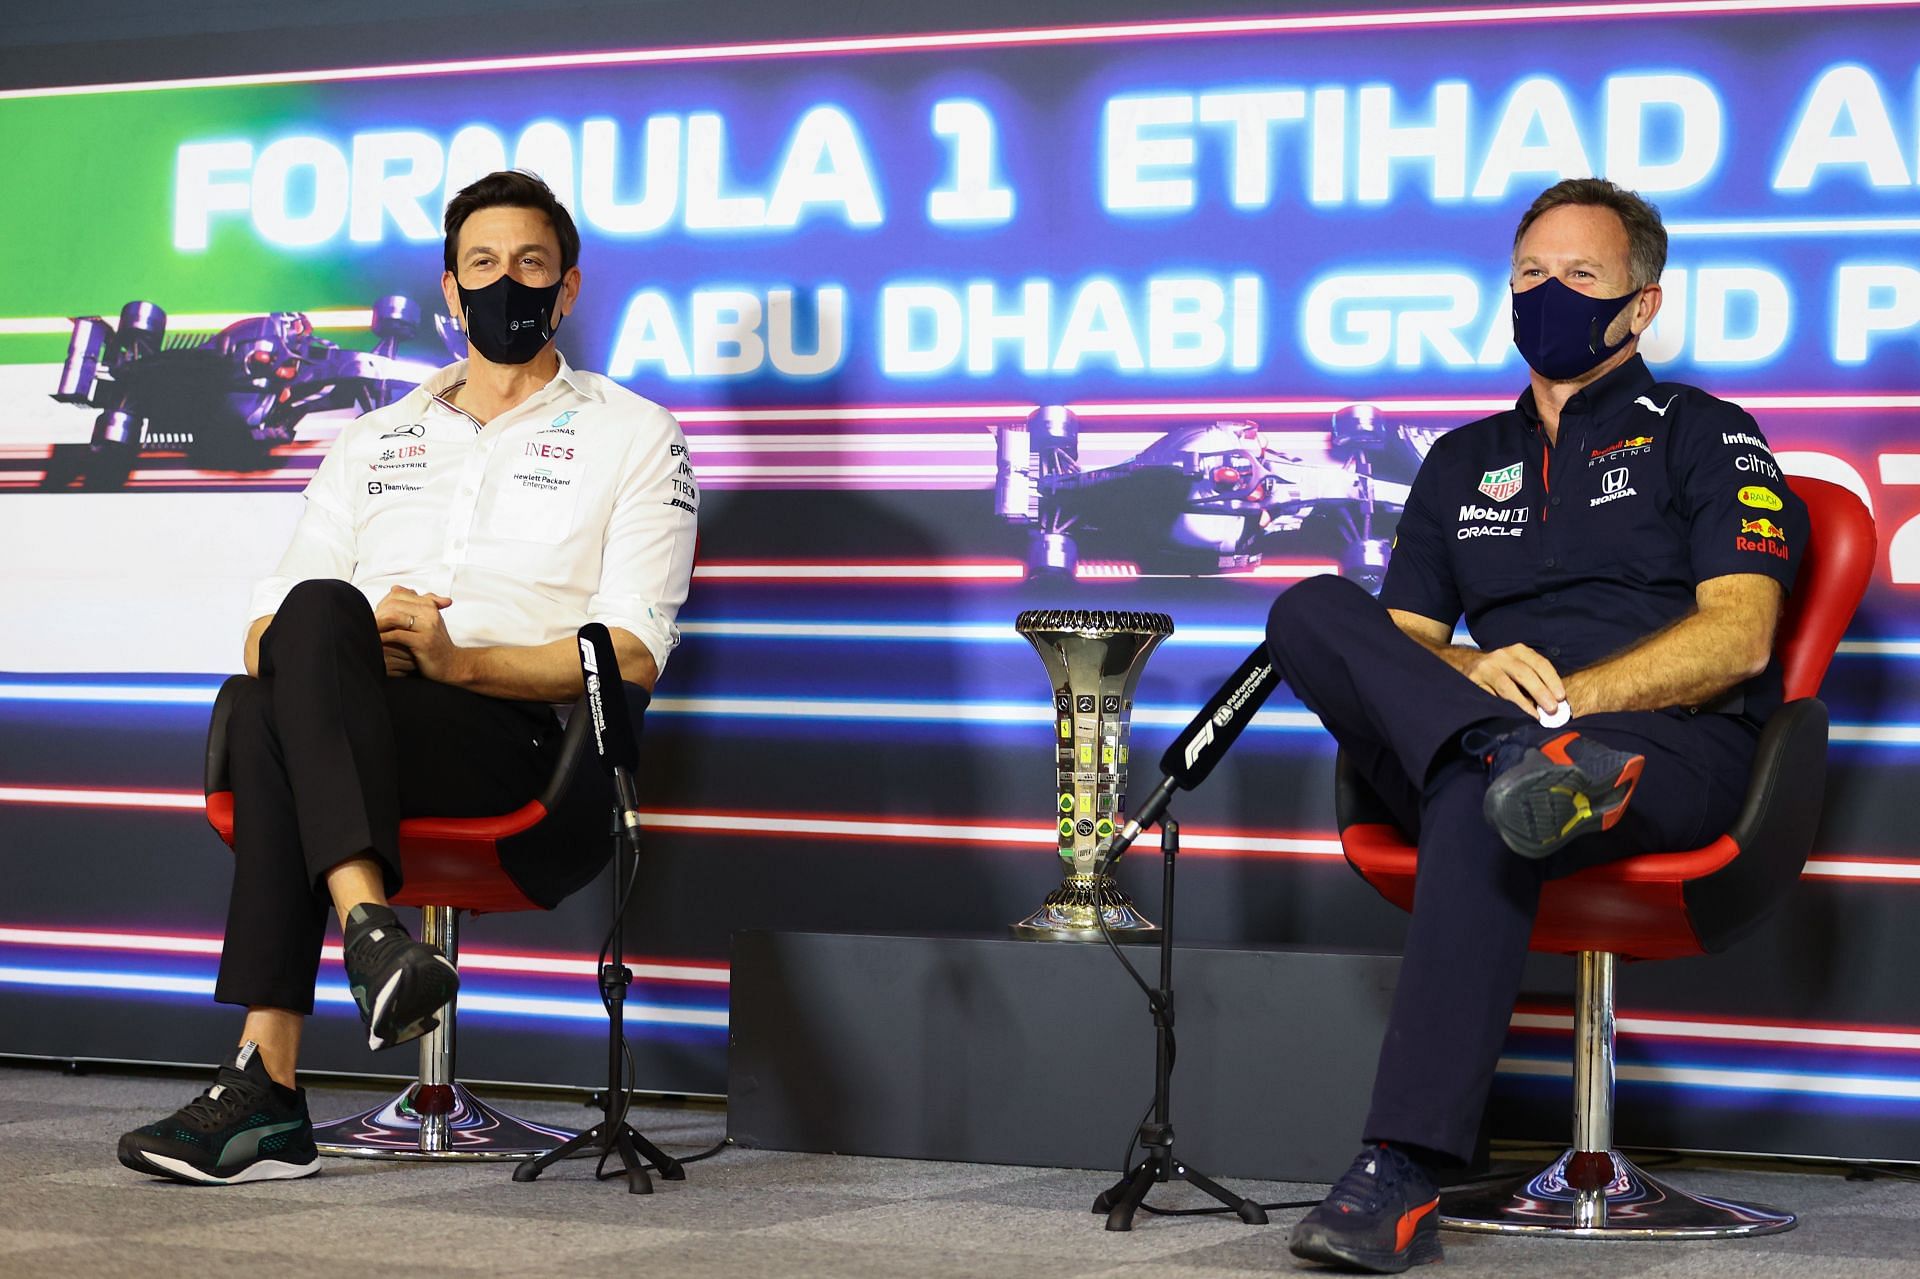 Mercedes&#039; Toto Wolff (left) and Red Bull&#039;s Christian Horner (right) prior to the 2021 Abu Dhabi Grand Prix (Photo by Bryn Lennon/Getty Images)